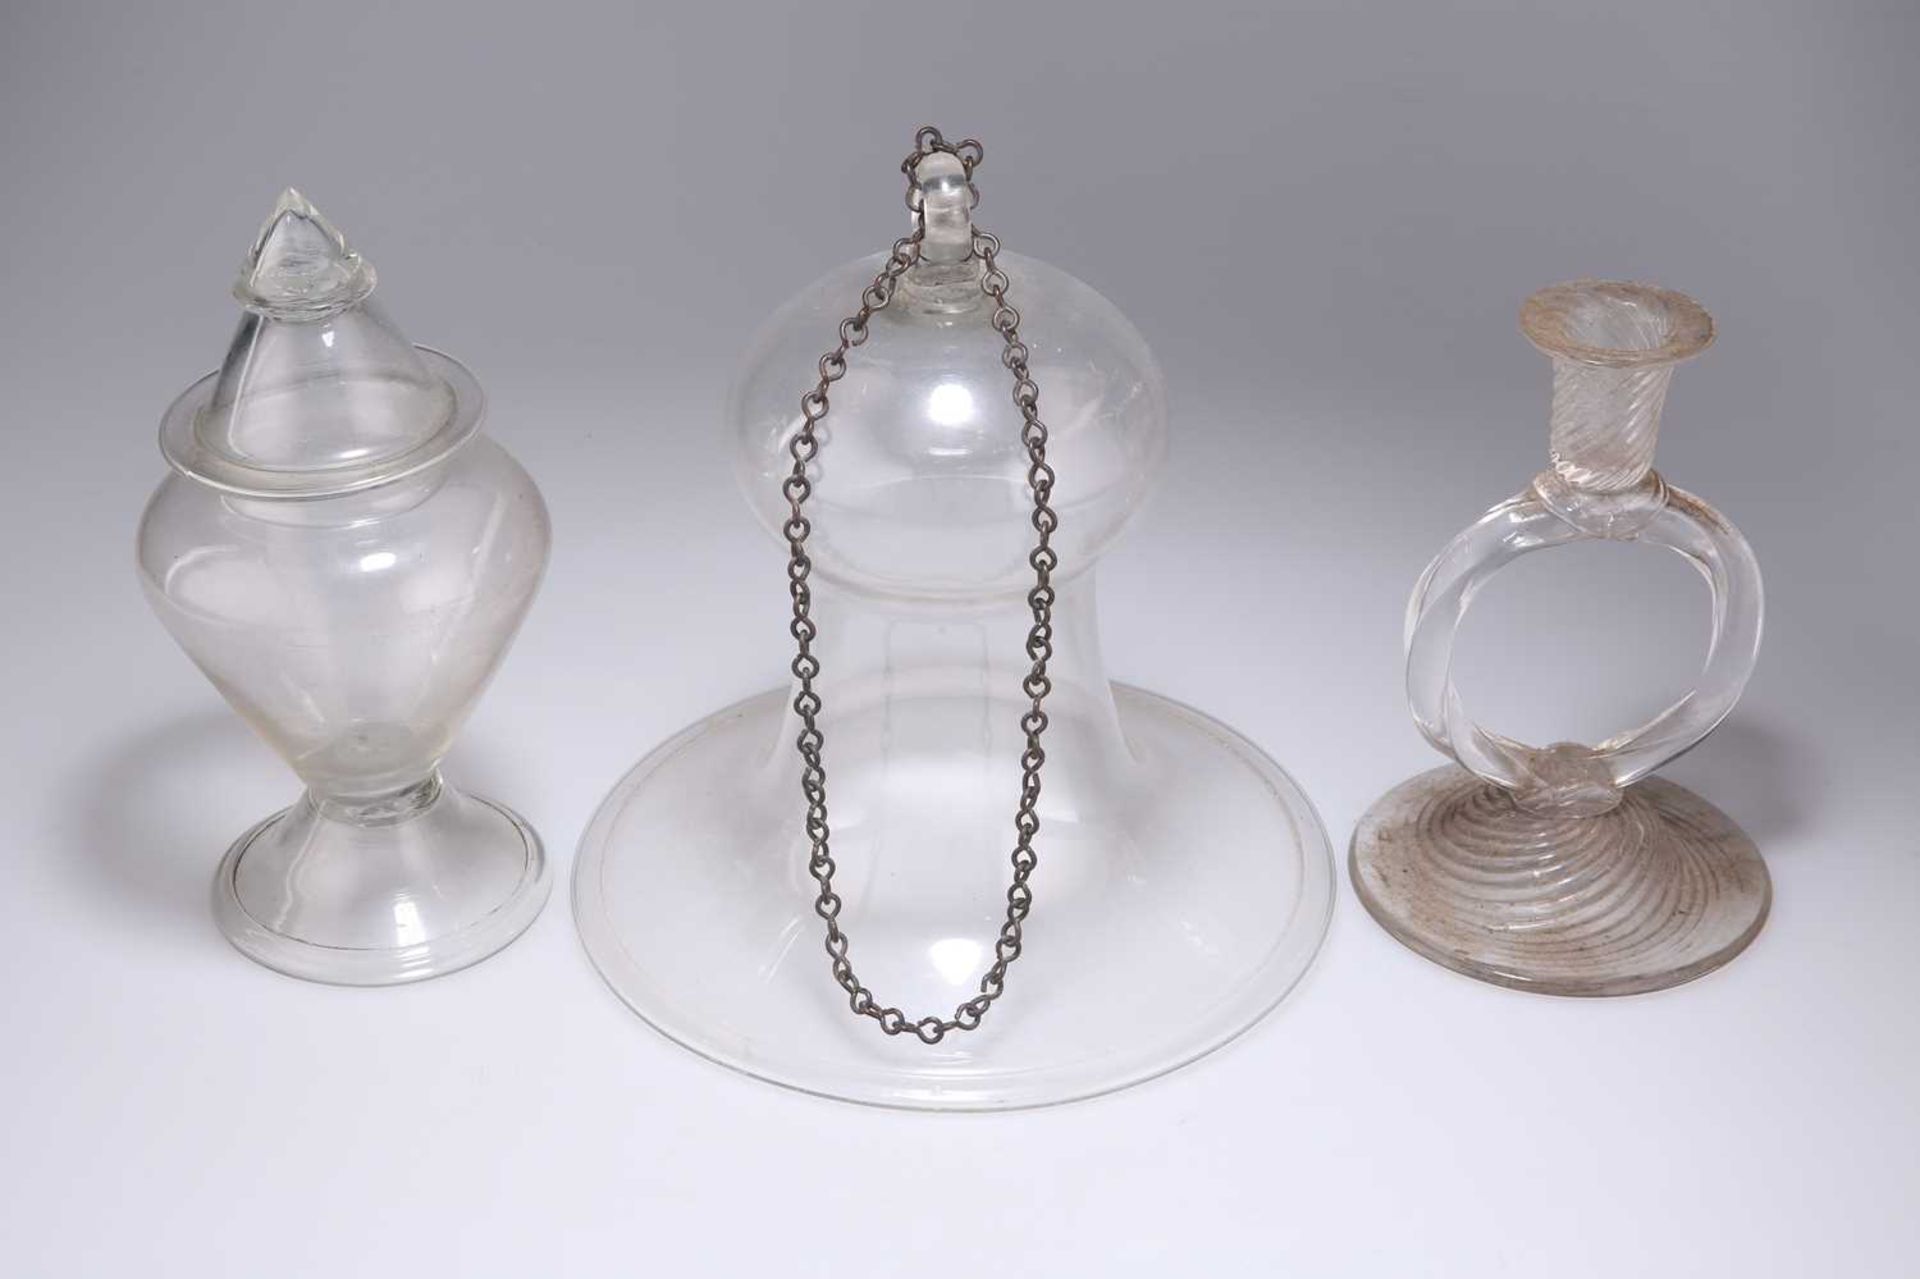 A 19TH CENTURY GLASS SMOKE BELL, A GLASS WRYTHEN CANDLESTICK AND A DRUG JAR - Image 2 of 2